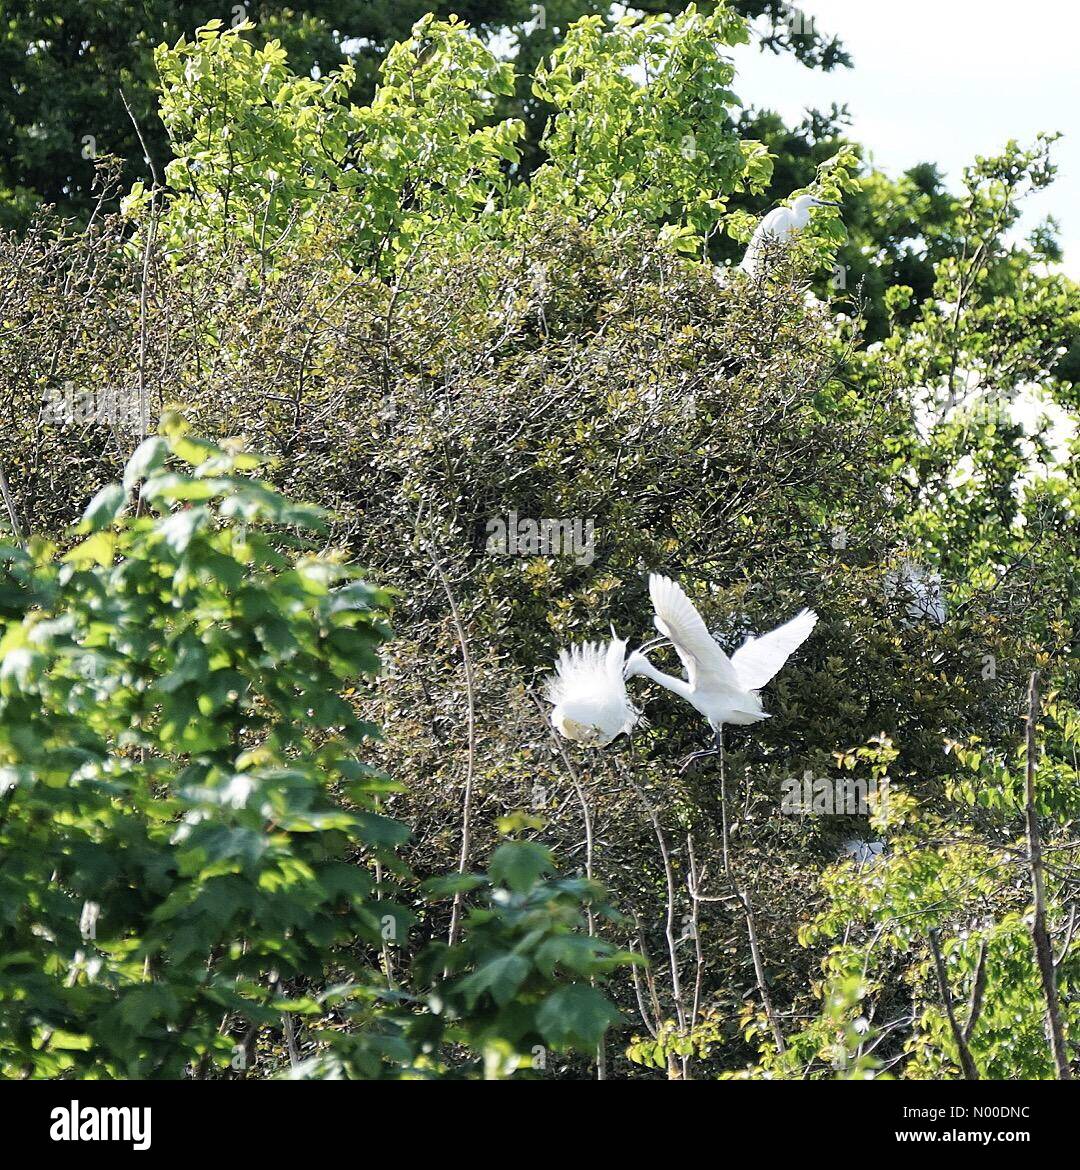 Havant, UK. 12th May, 2017. UK Weather: Sunny in Havant. Langstone Rd, Havant. 12th May 2017. Sunny intervals over the south coast today. A little egret feeding her chick at a nature reserve in Havant. Credit: jamesjagger/StockimoNews/Alamy Live News Stock Photo